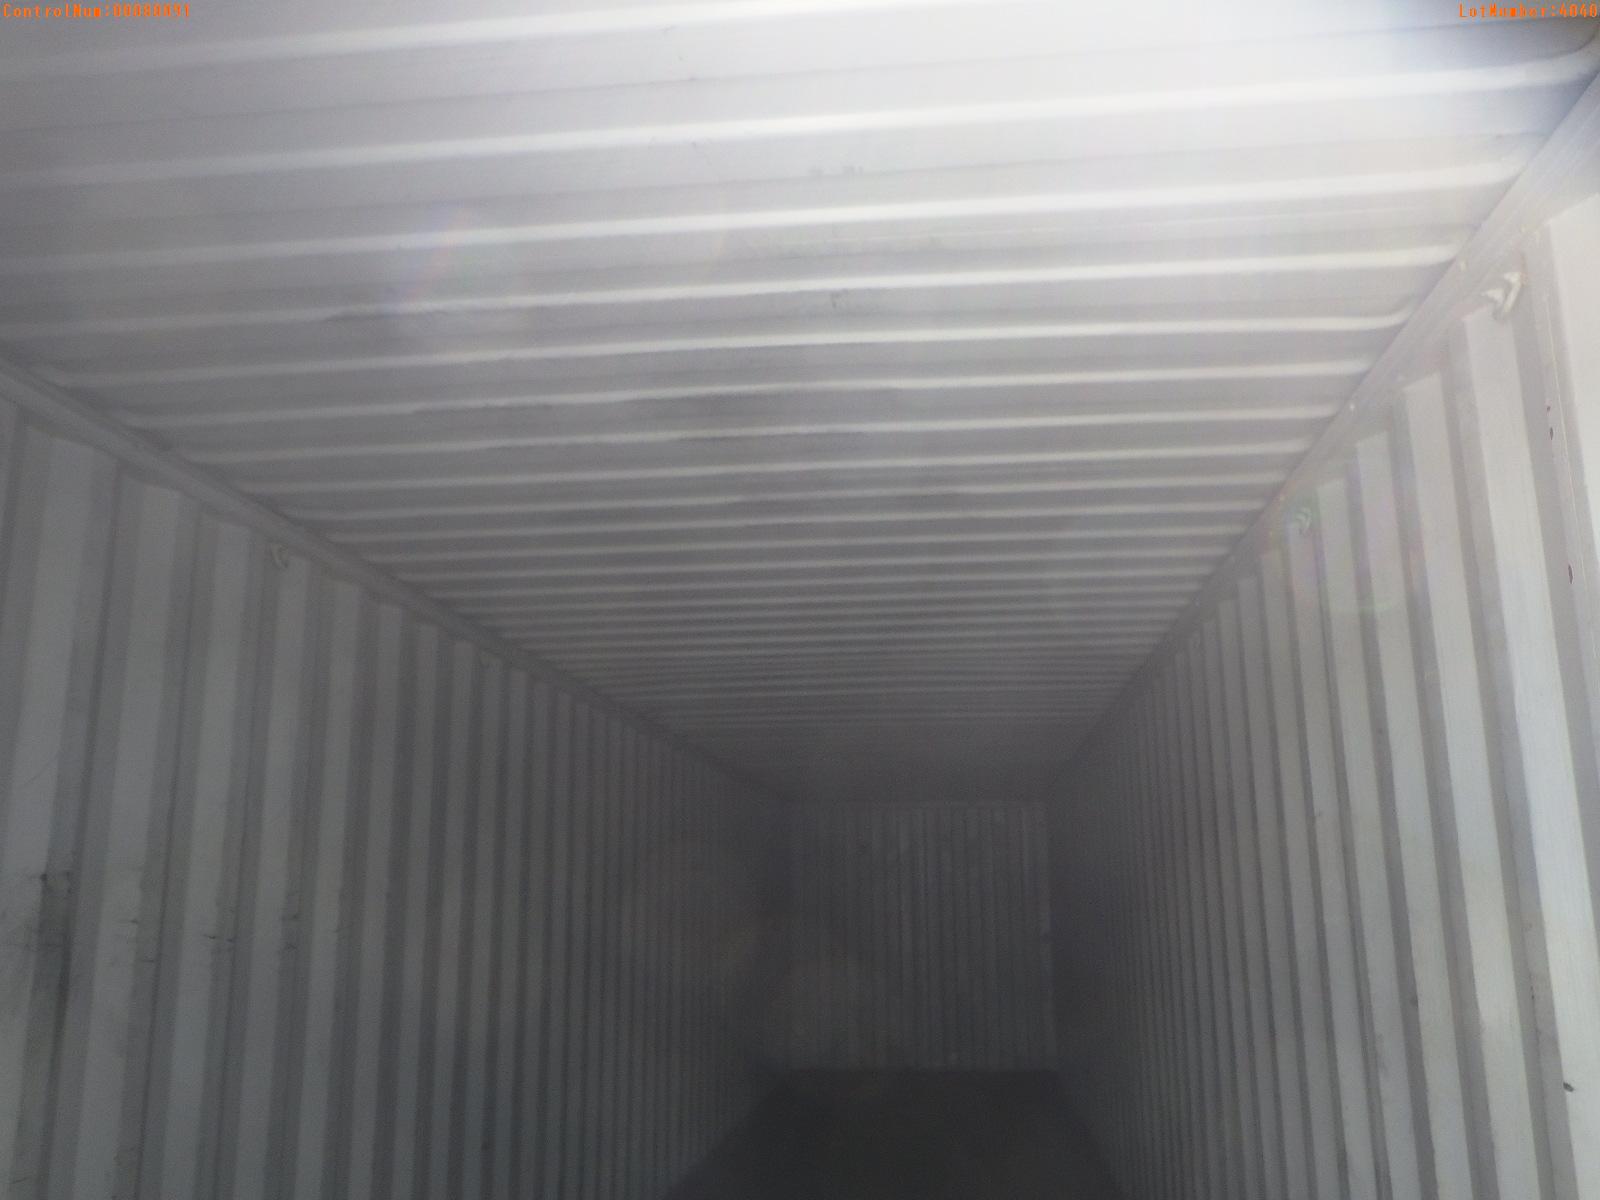 5-04040 (Equip.-Container)  Seller:Private/Dealer 40 FOOT METAL SHIPPING CONTAIN